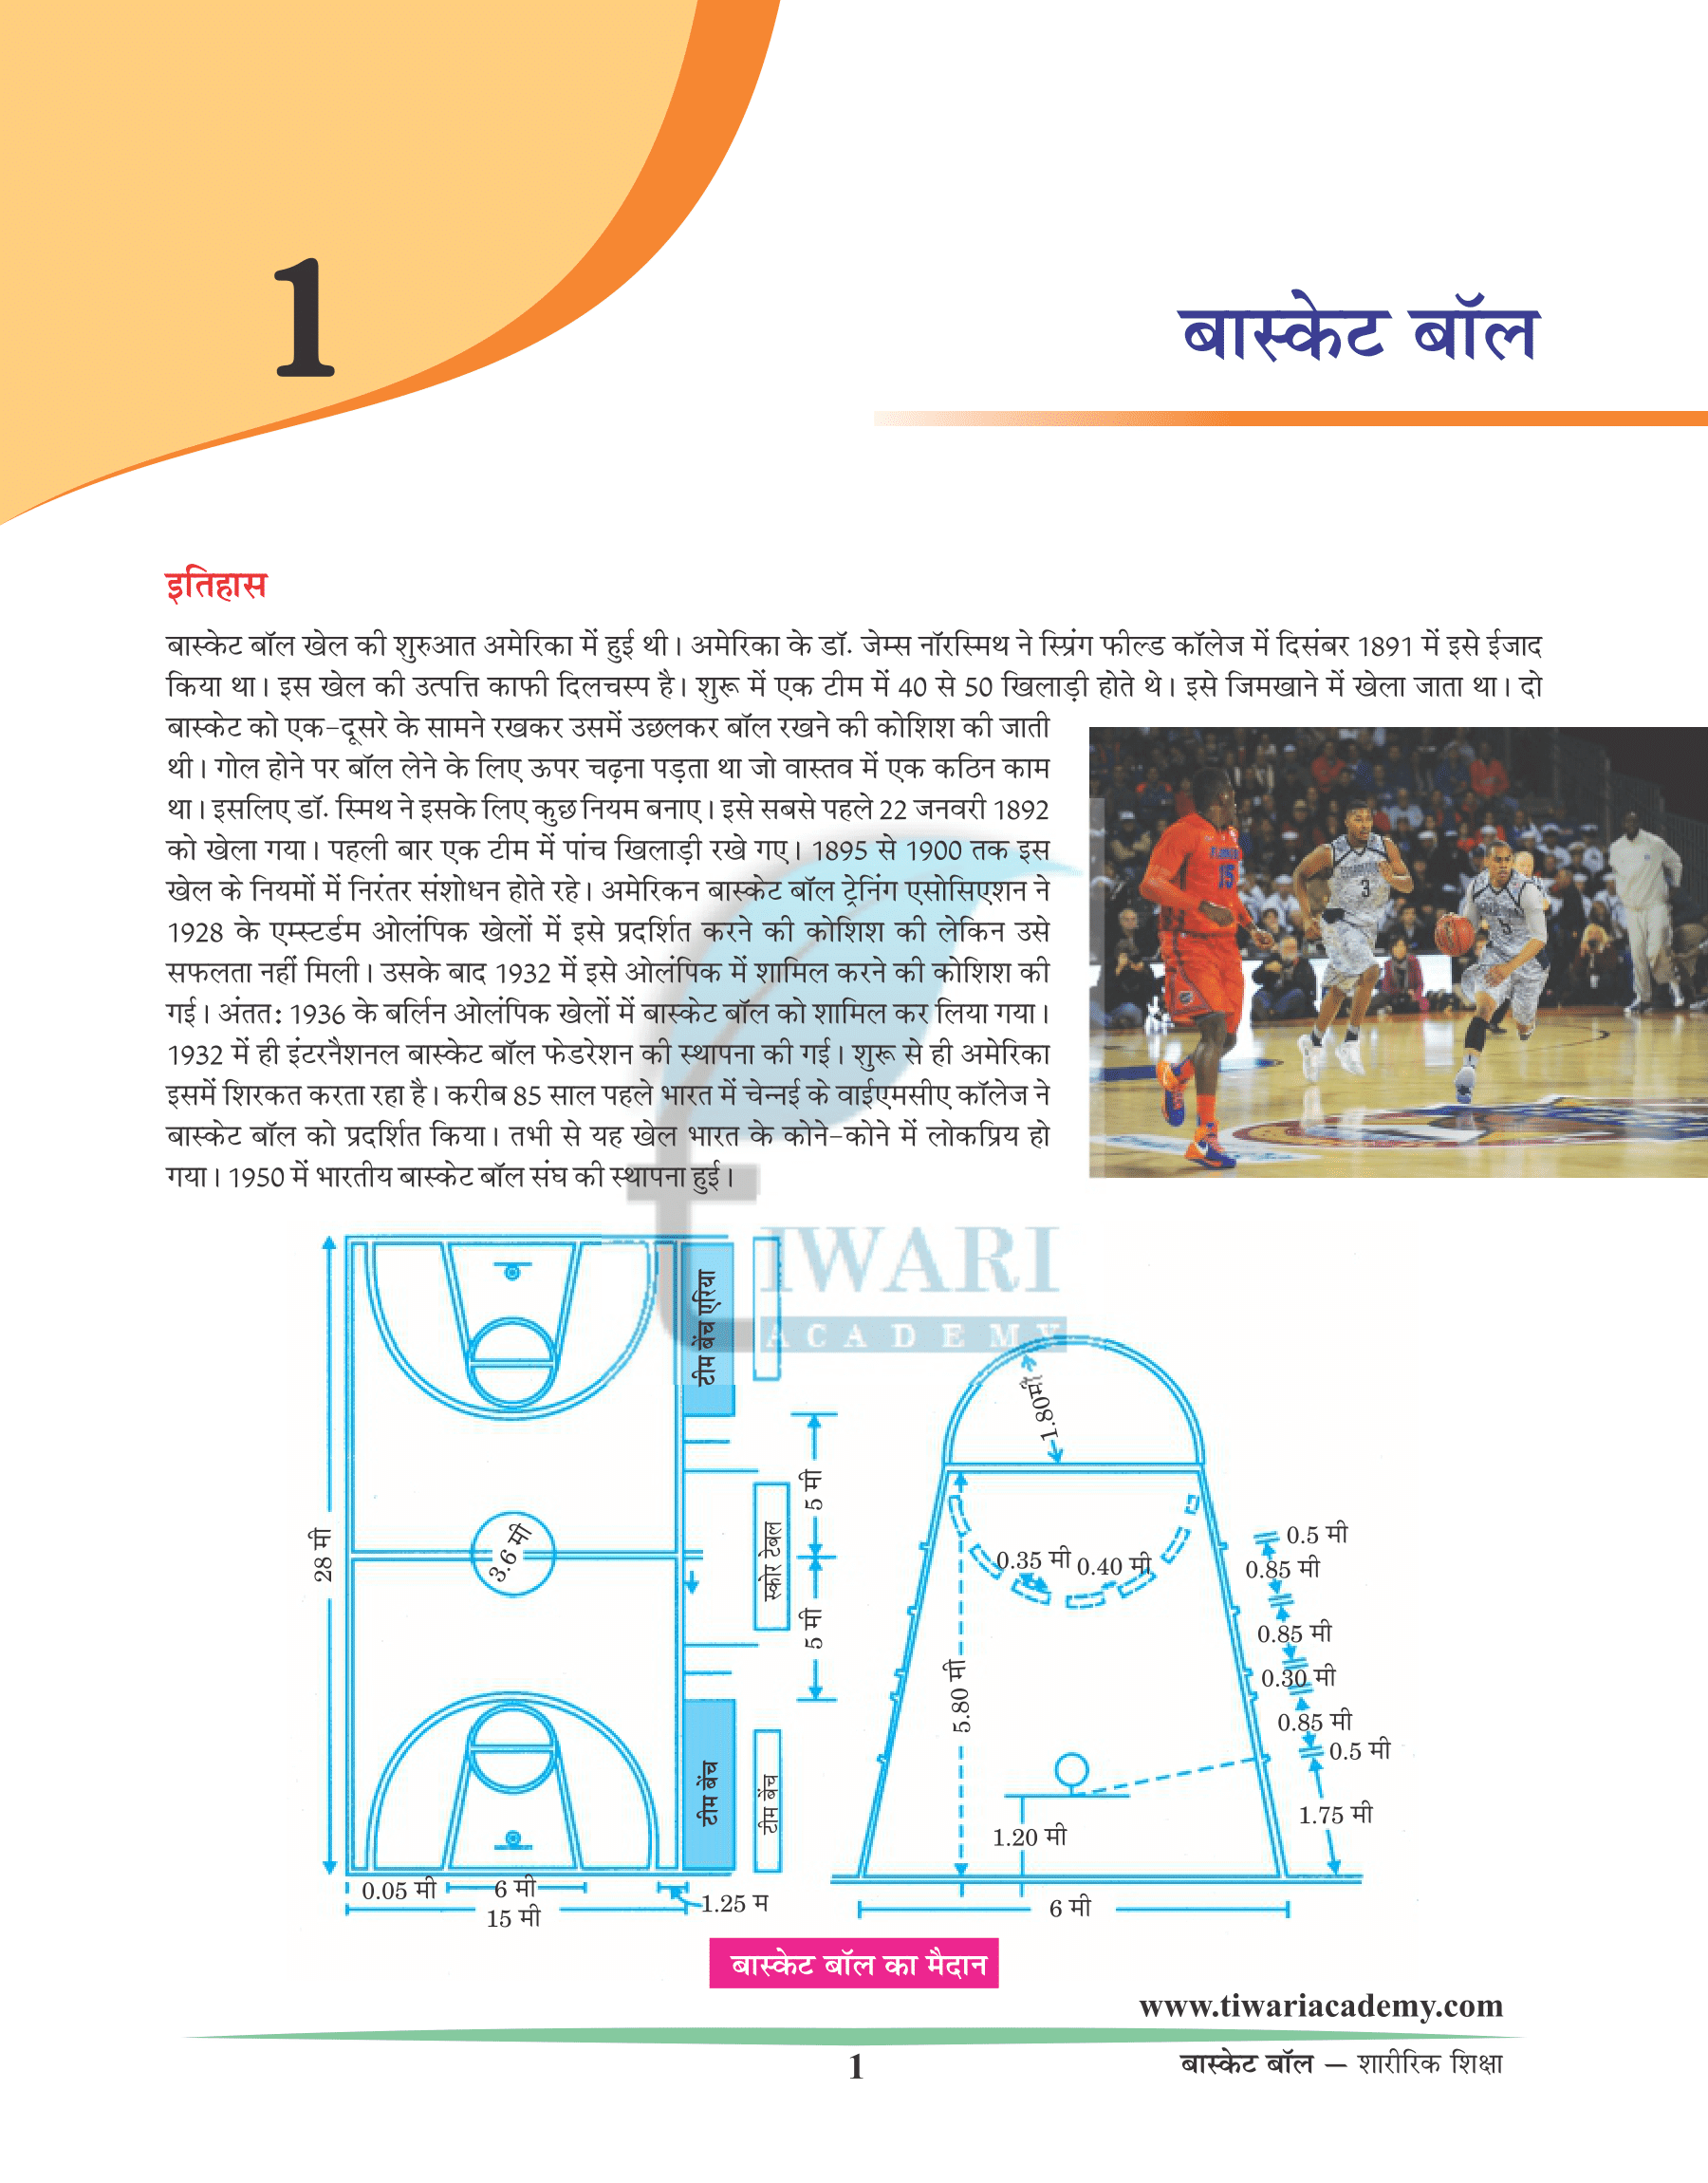 Basketball in India